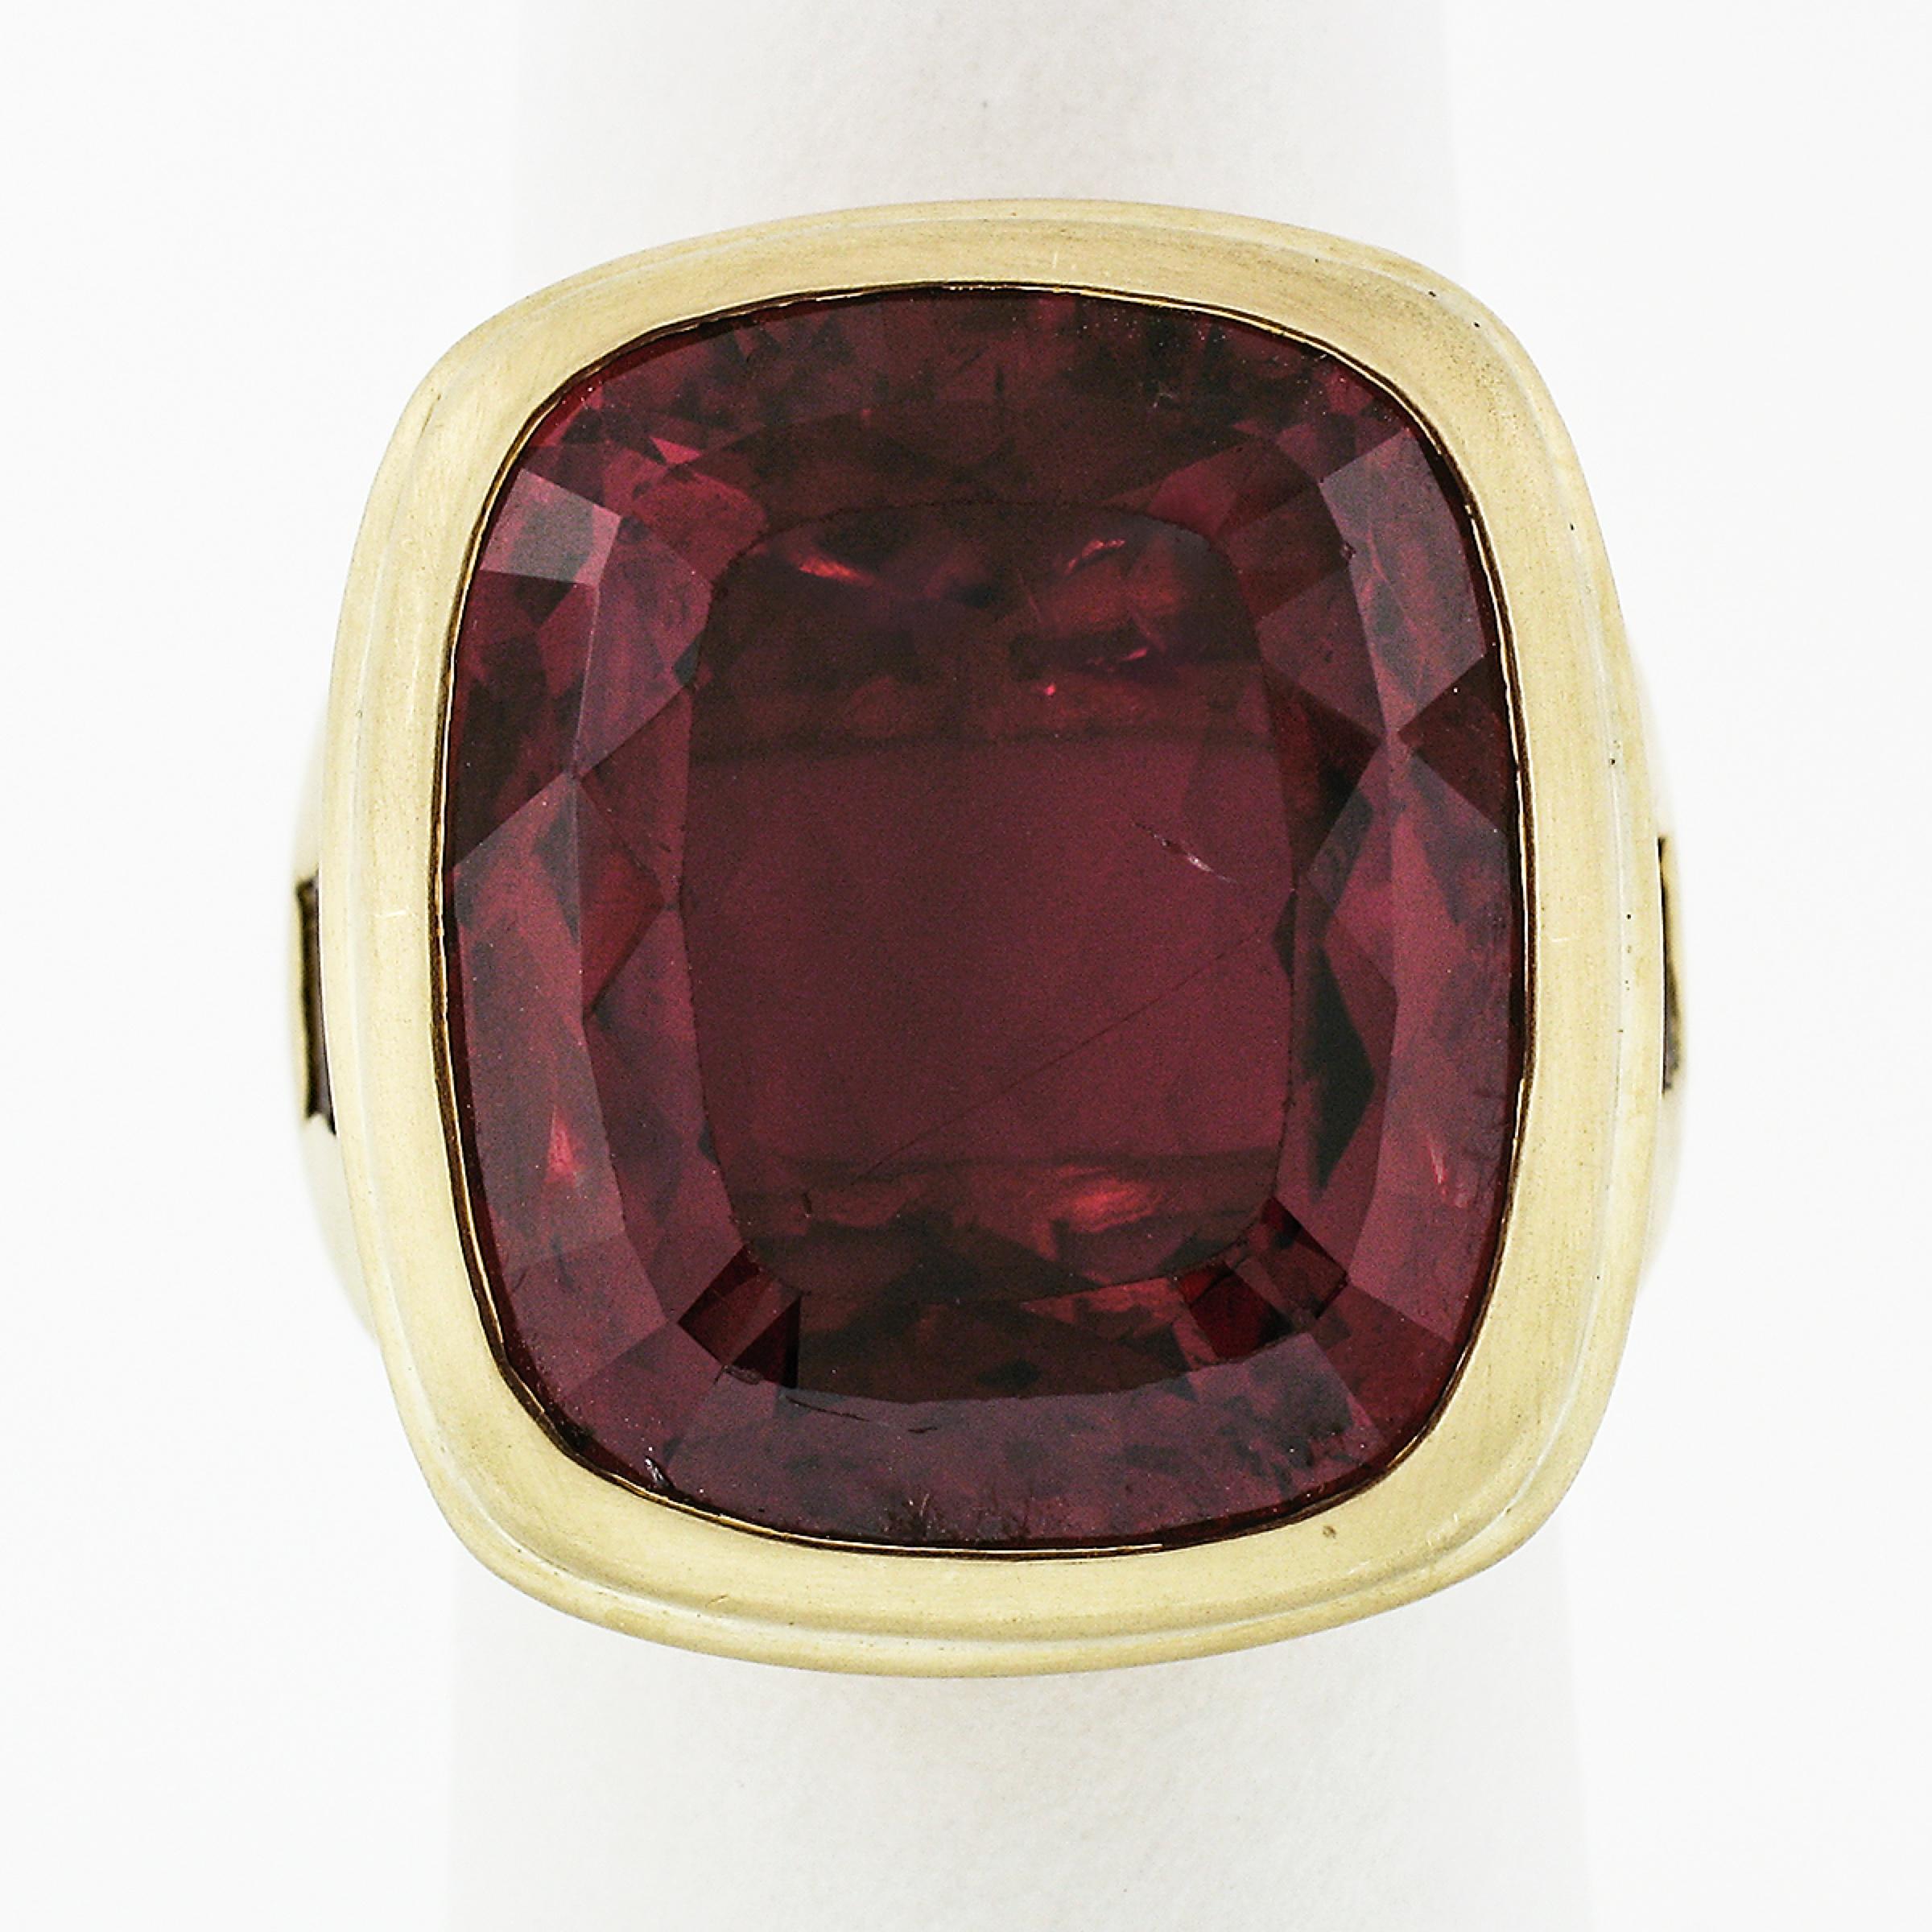 Here we have a magnificent statement ring crafted in solid 18k greenish yellow gold and designed by Kieselsein Cord. The ring features a large and breathtakingly rubellite solitaire, perfectly bezel set at its center. The gorgeous tourmaline weighs